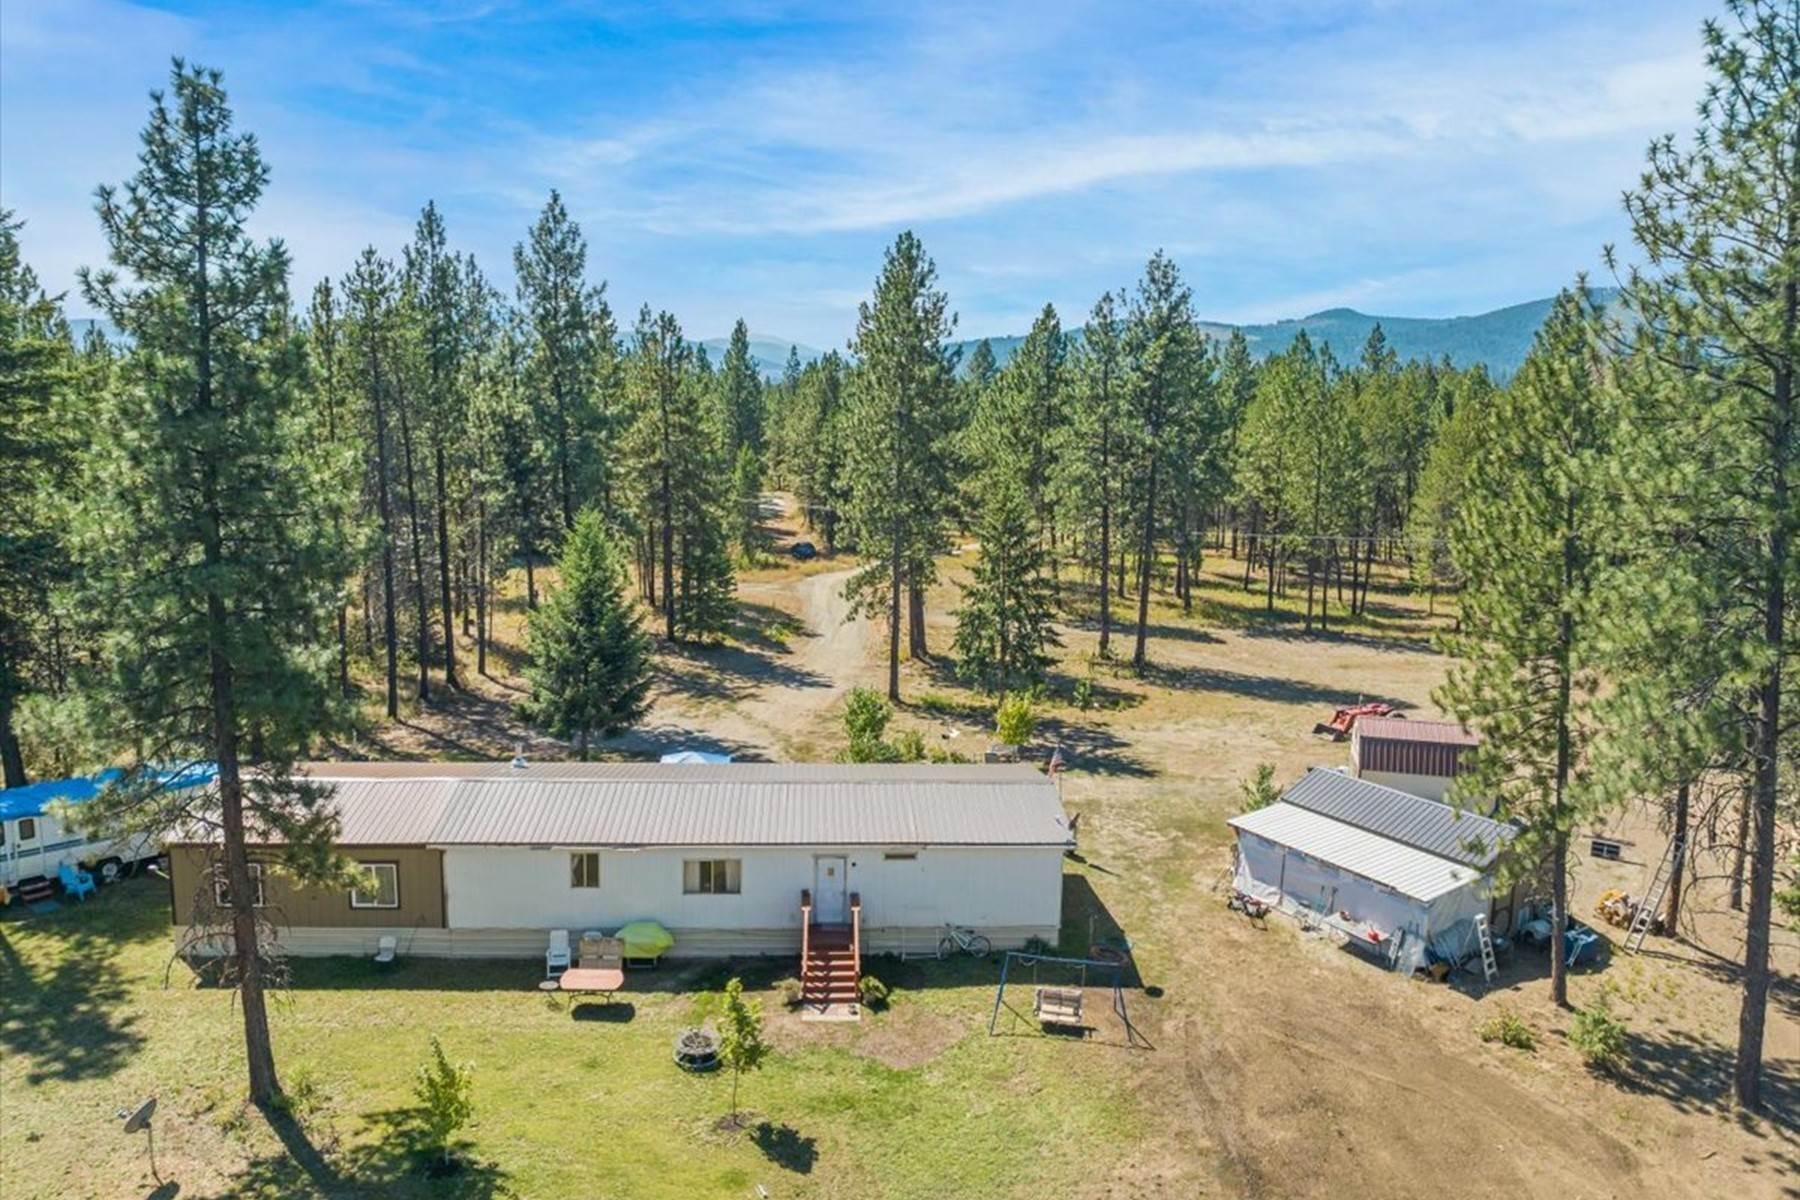 2. Property for Sale at 89 Outback Ct 237 Outback Ridge Ct Spirit Lake, Idaho 83869 United States